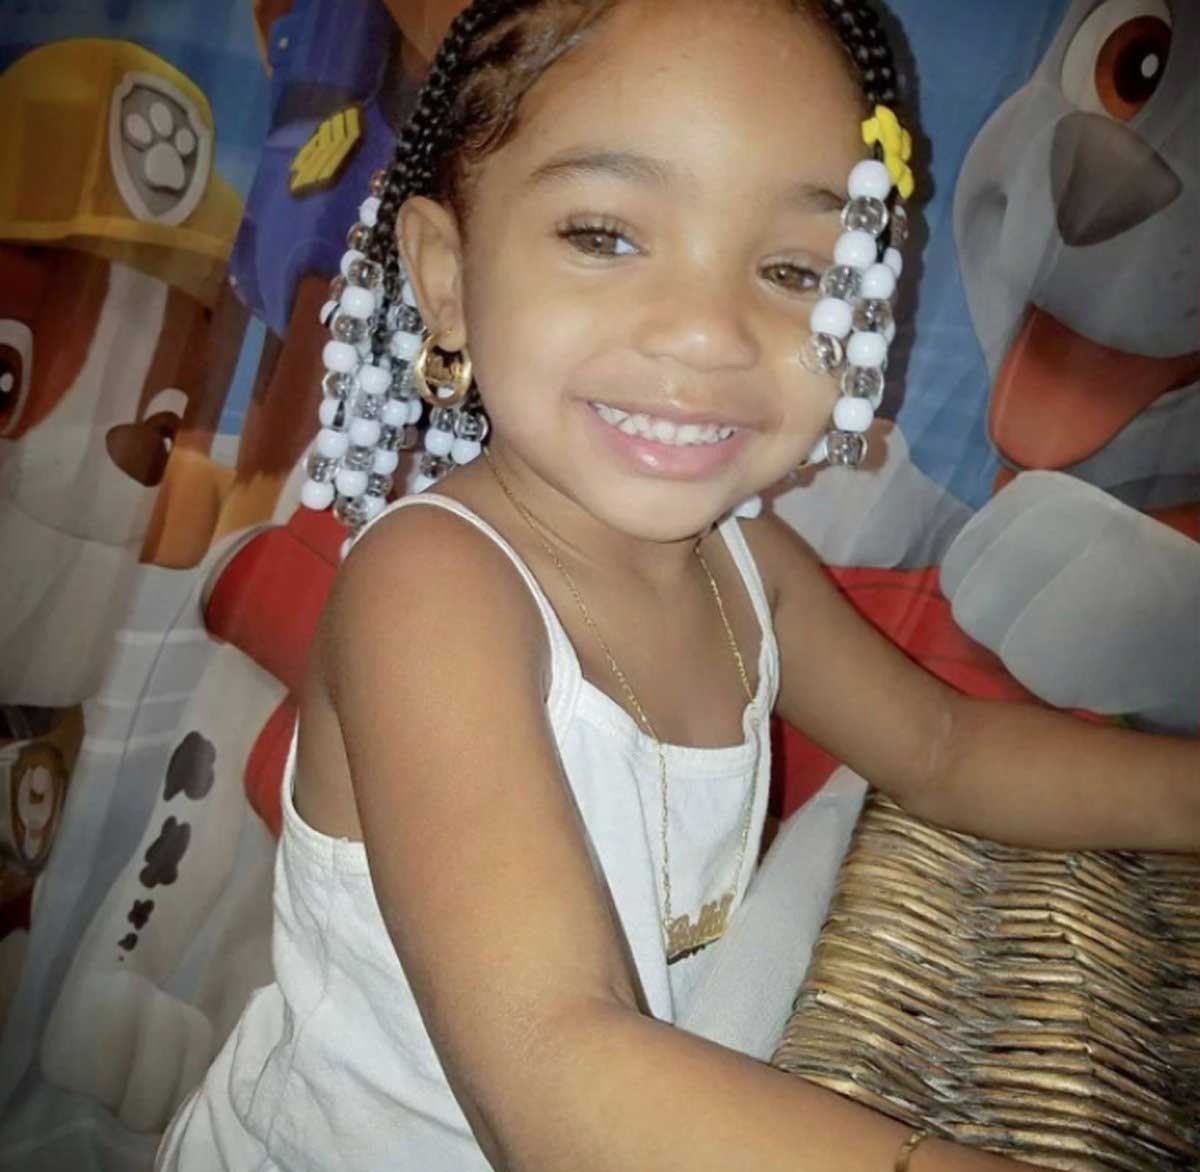 Rockaway man charged in death of 3-year-old girl: NYPD